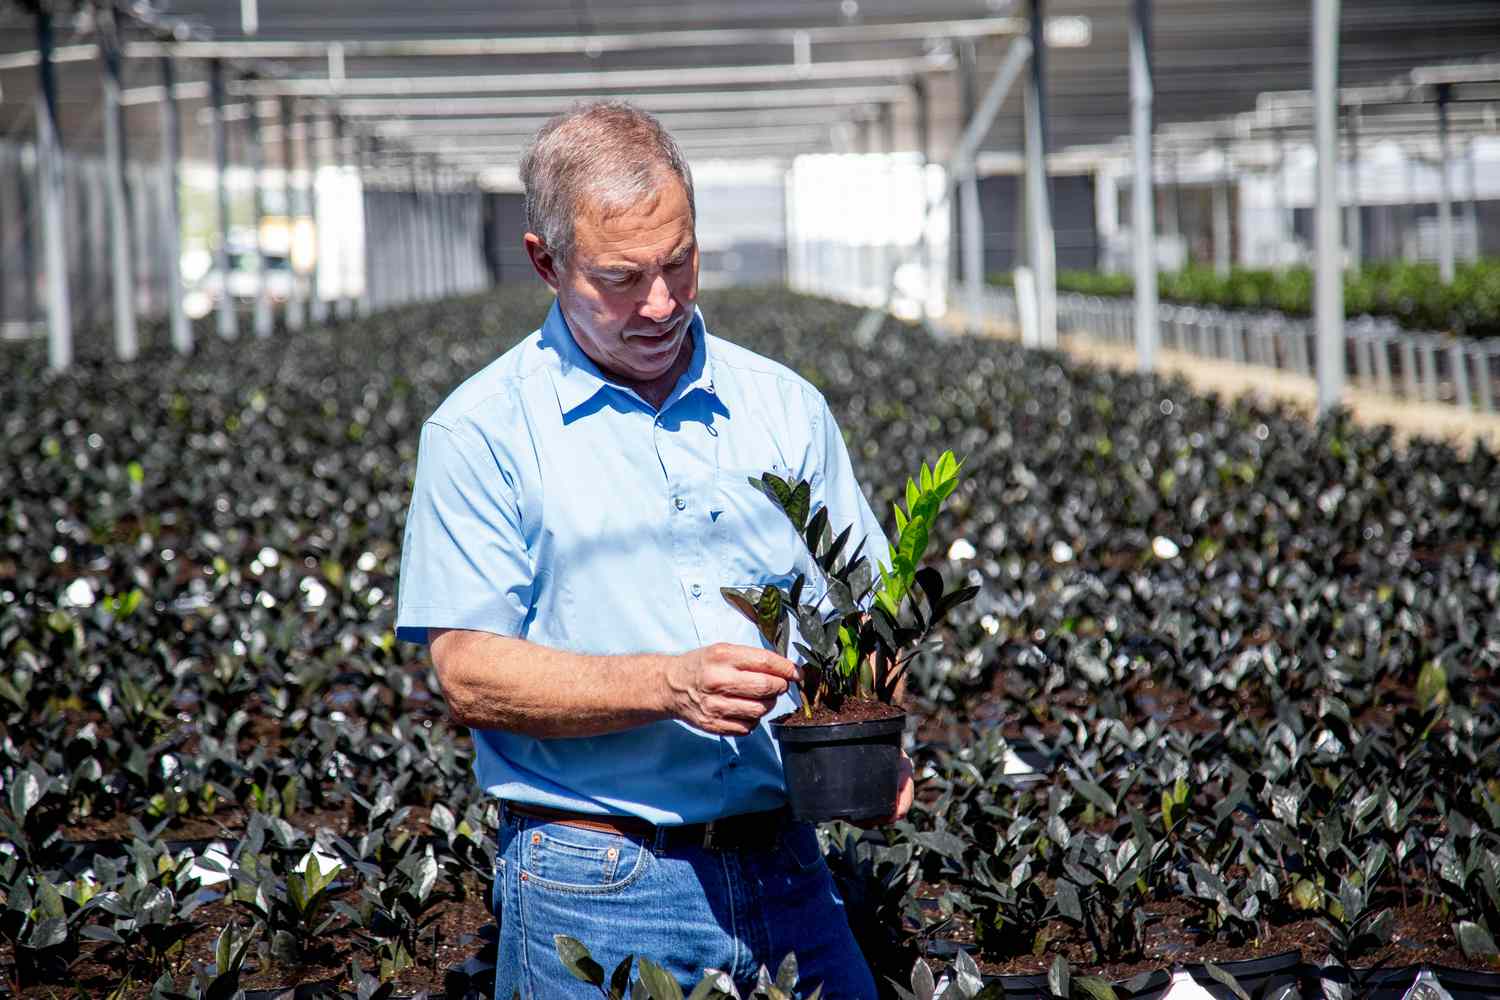 Mike Rimland from Costa Farms inspecting a plant